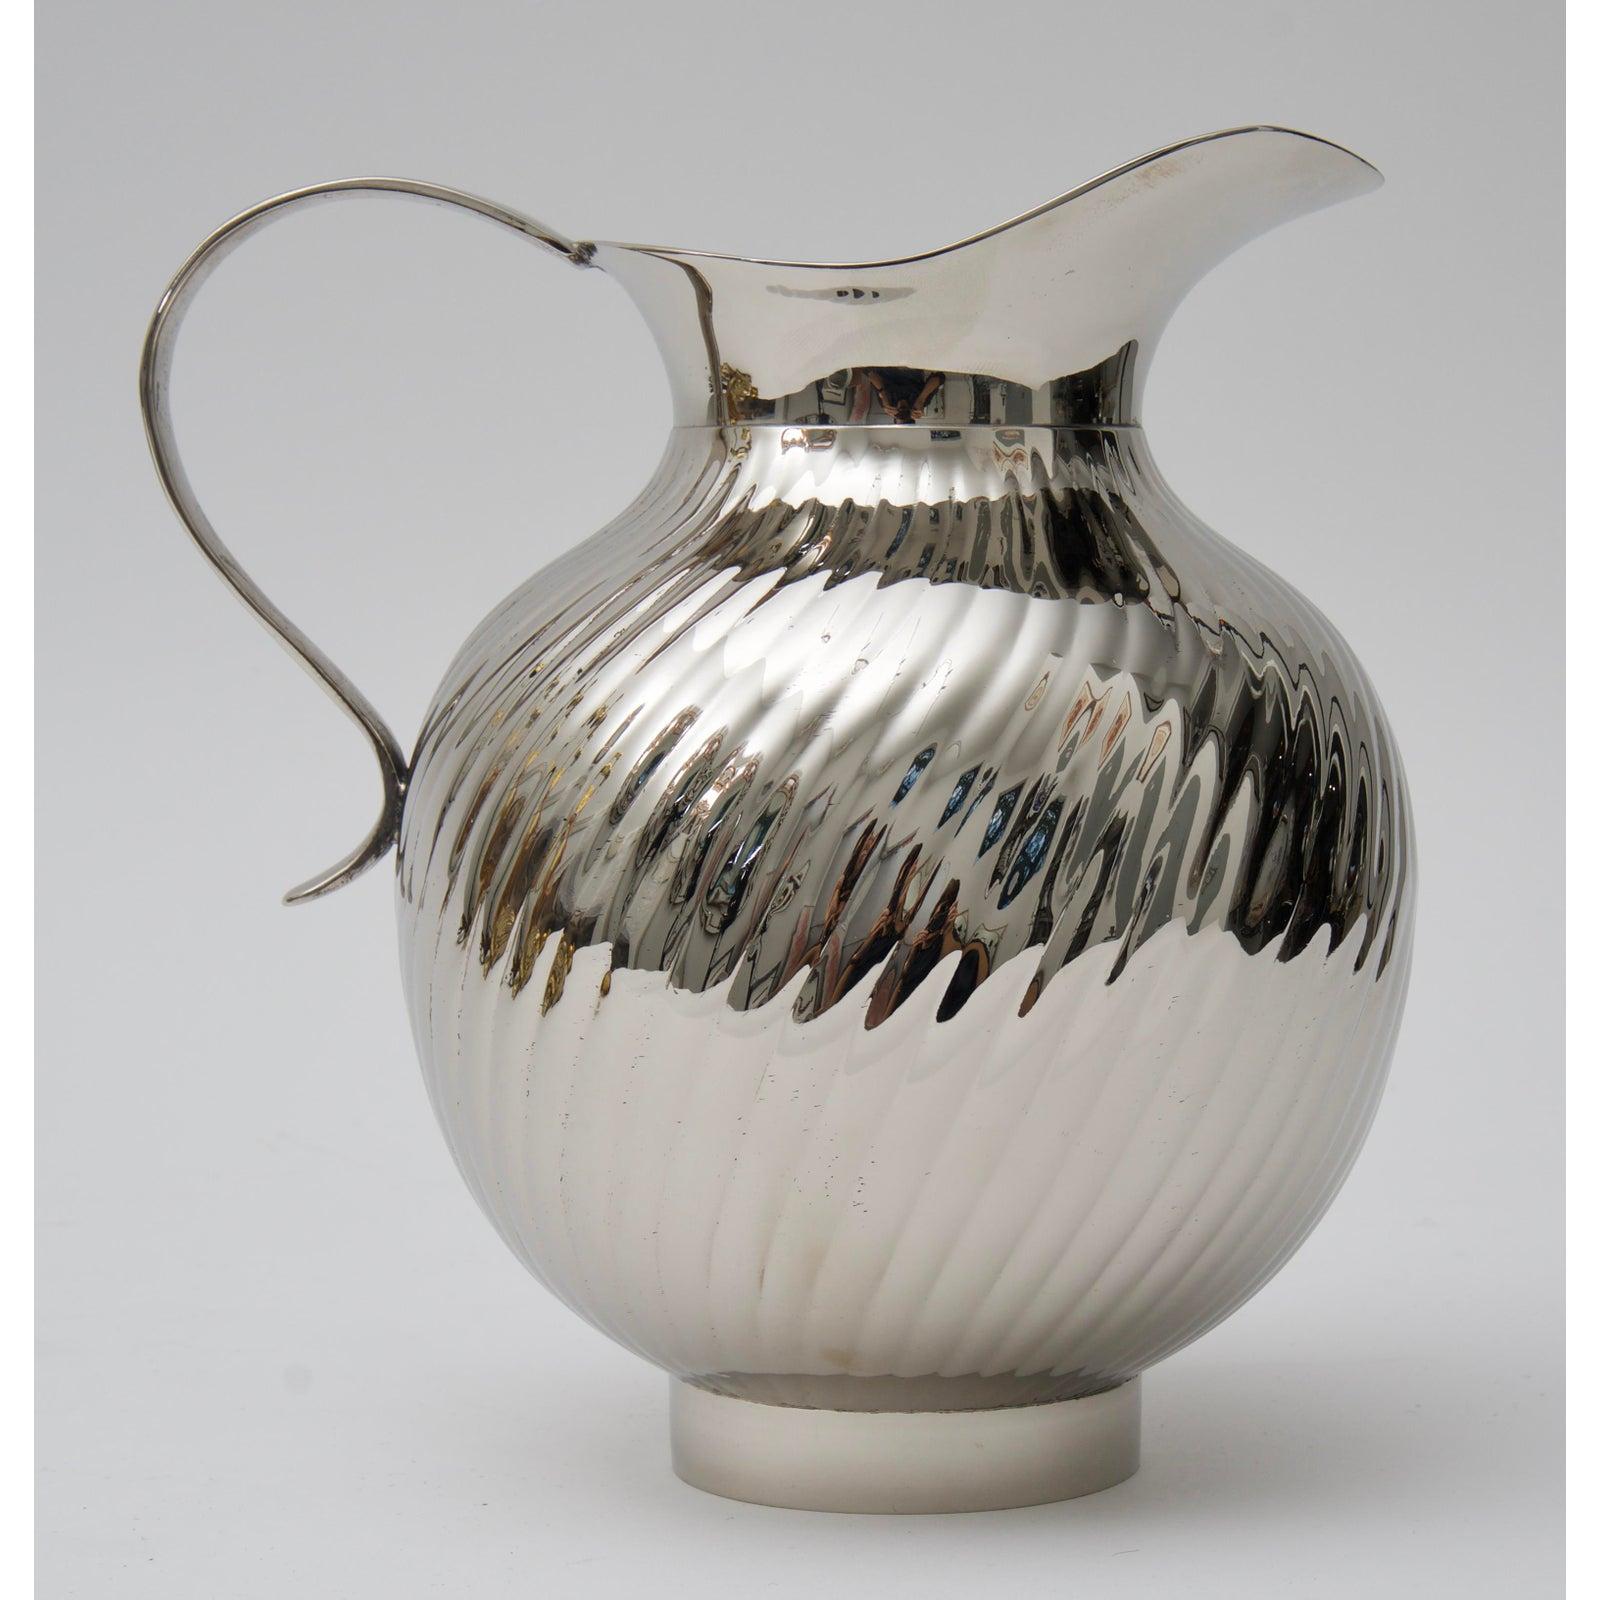 This stylish nickel-plated water pitcher will make a great addition to your barware collection and of course for your next holiday gathering.

Note: This piece has a great weight to it of 2.55 lbs.